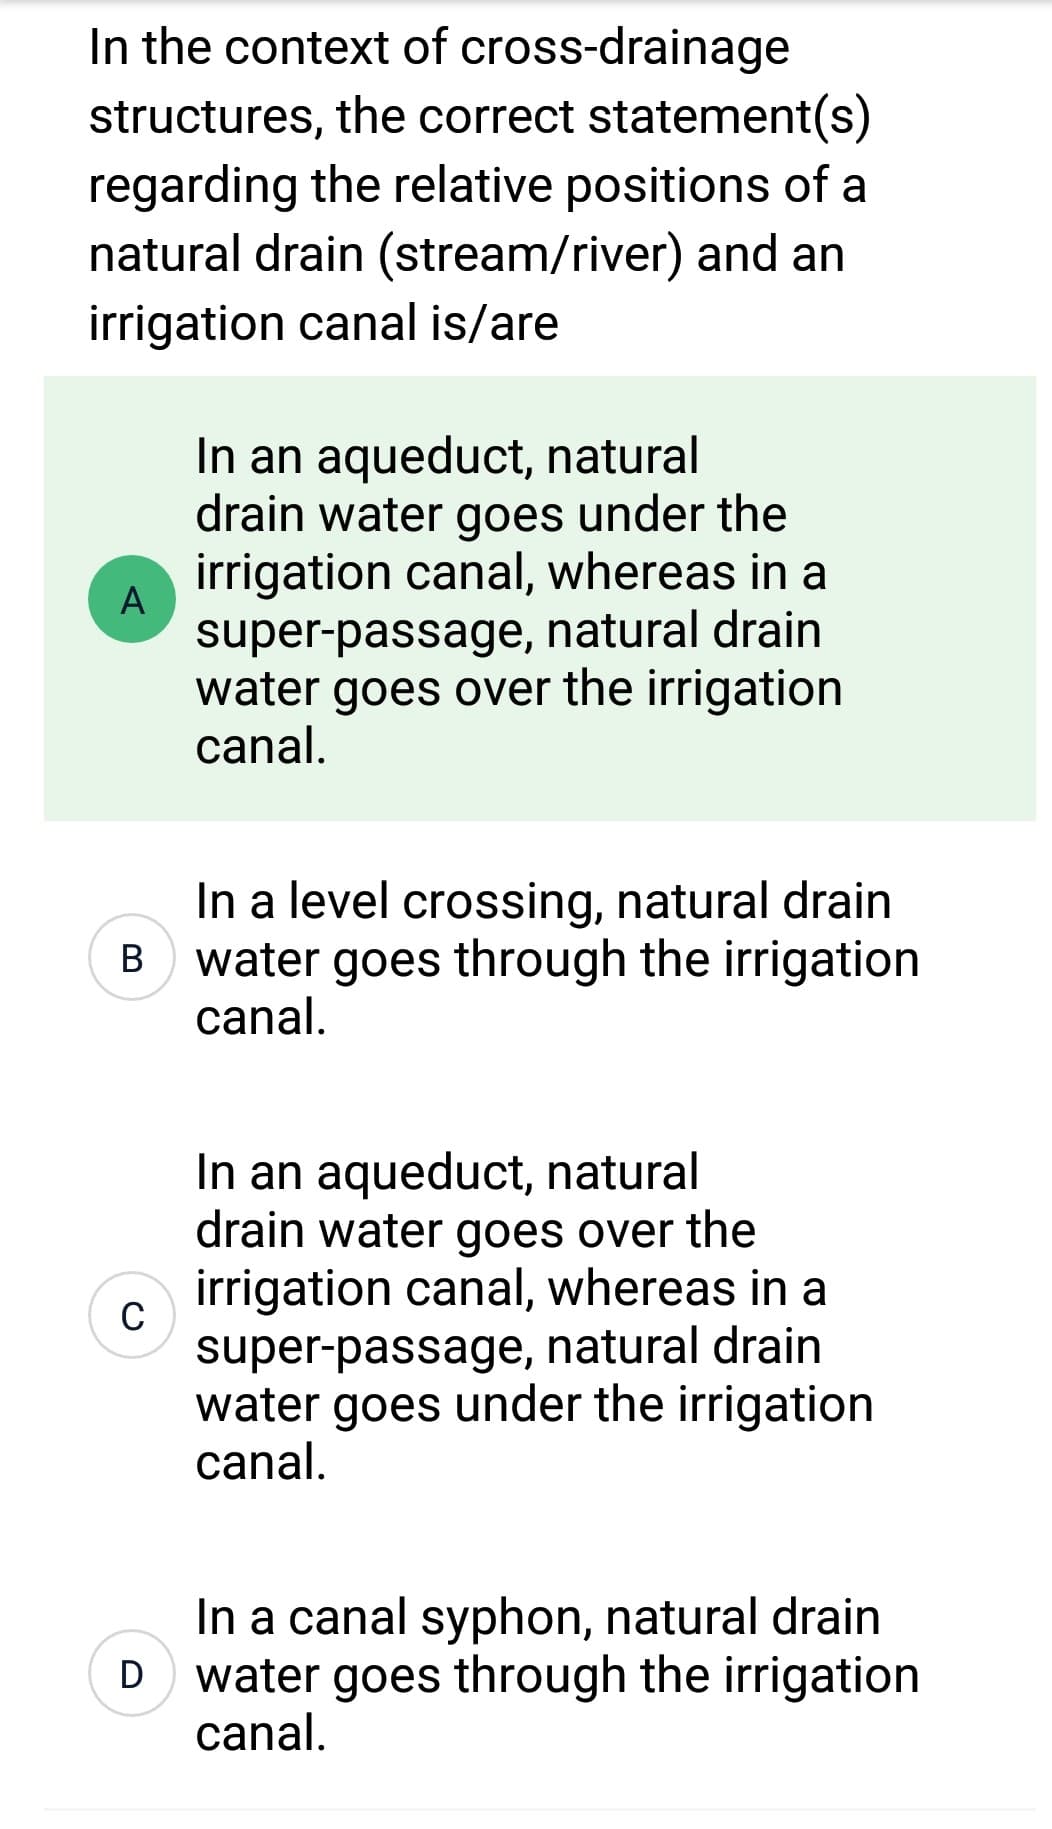 In the context of cross-drainage
structures, the correct statement(s)
regarding the relative positions of a
natural drain (stream/river) and an
irrigation canal is/are
A
B
C
D
In an aqueduct, natural
drain water goes under the
irrigation canal, whereas in a
super-passage, natural drain
water goes over the irrigation
canal.
In a level crossing, natural drain
water goes through the irrigation
canal.
In an aqueduct, natural
drain water goes over the
irrigation canal, whereas in a
super-passage, natural drain
water goes under the irrigation
canal.
In a canal syphon, natural drain
water goes through the irrigation
canal.